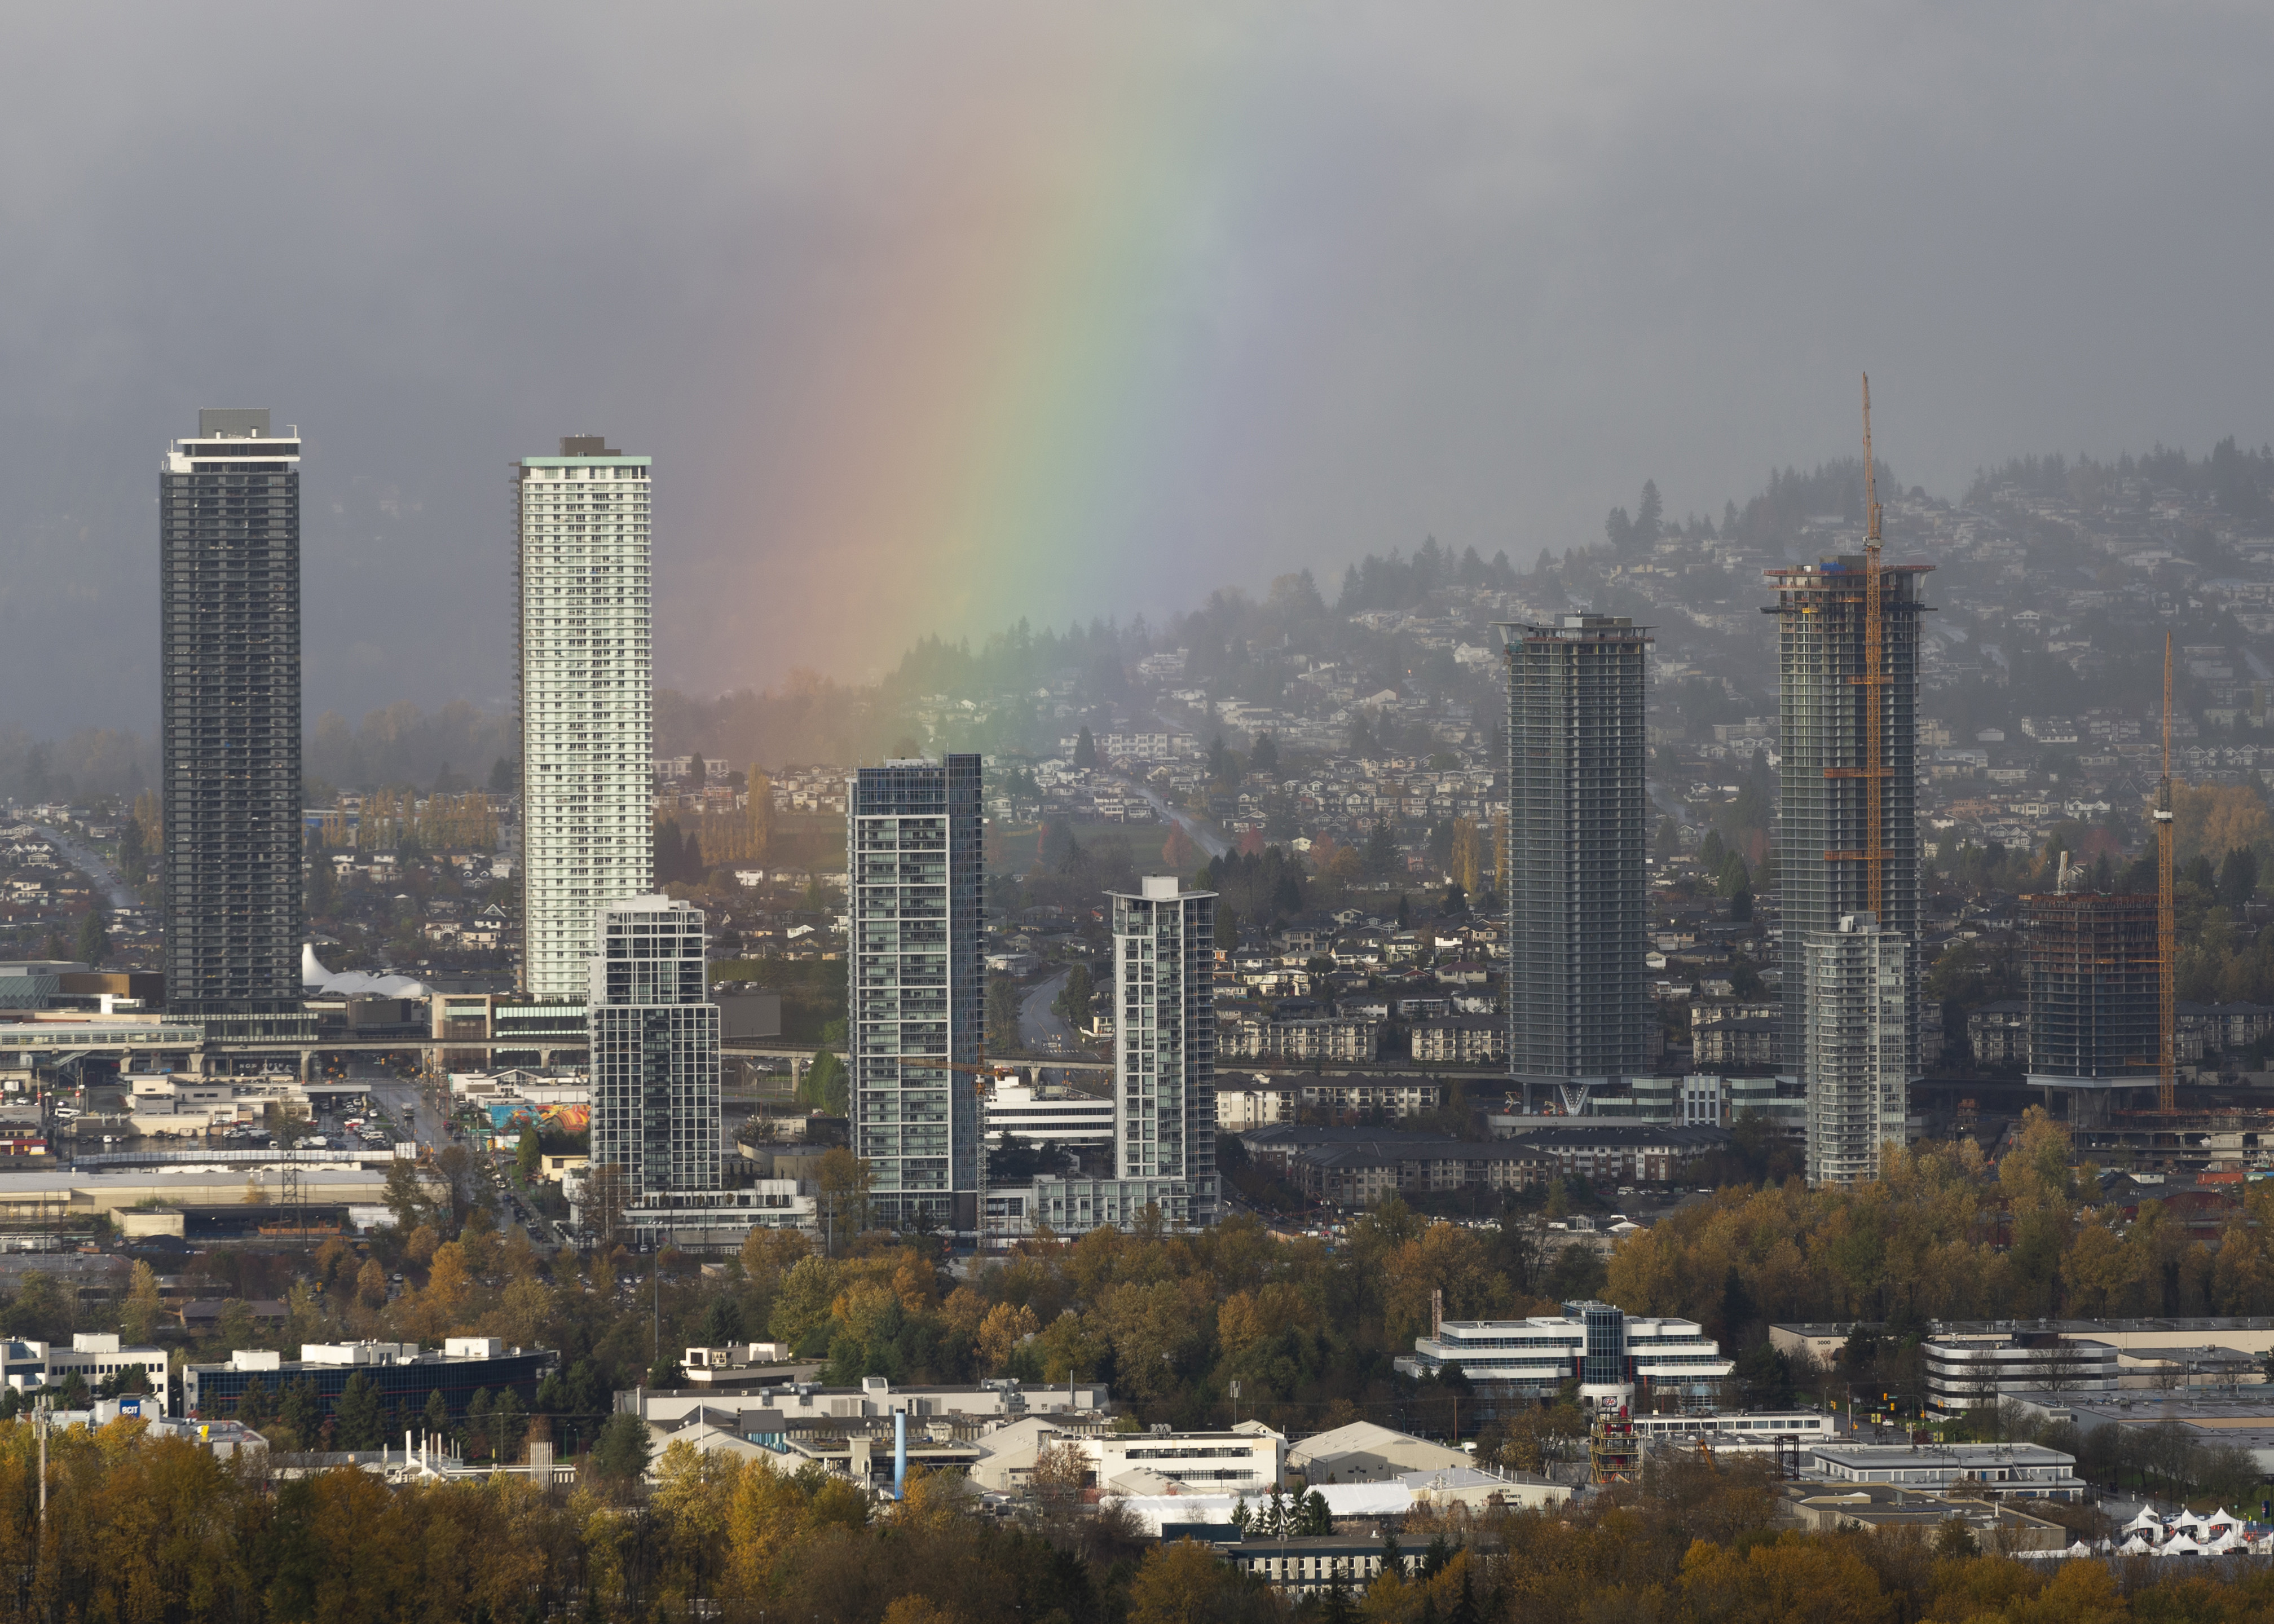 A view of autumn colors on the trees and a rainbow against a view of the metro Vancouver skyline on November 07, 2021 in Burnaby, British Columbia, Canada.